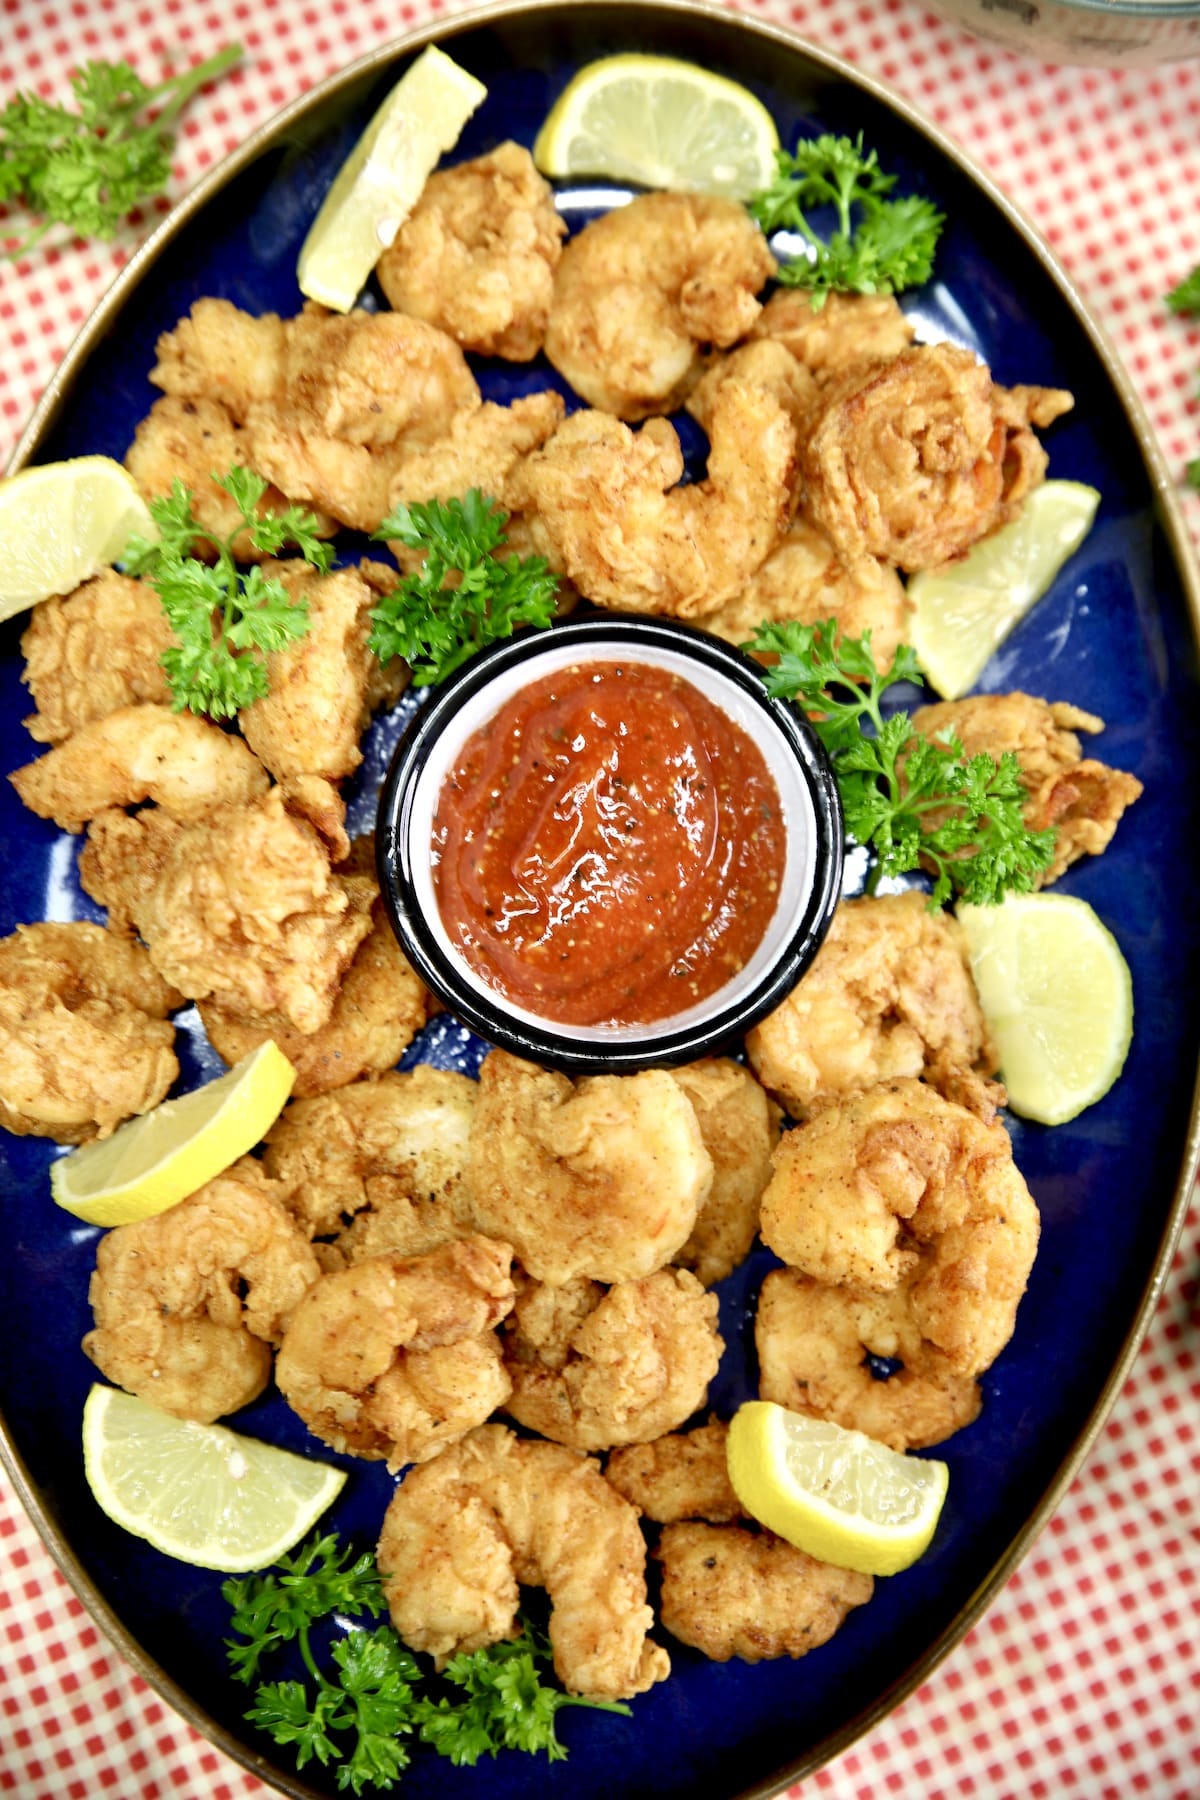 Platter of fried shrimp with lemon wedges, parsley and cocktail sauce.